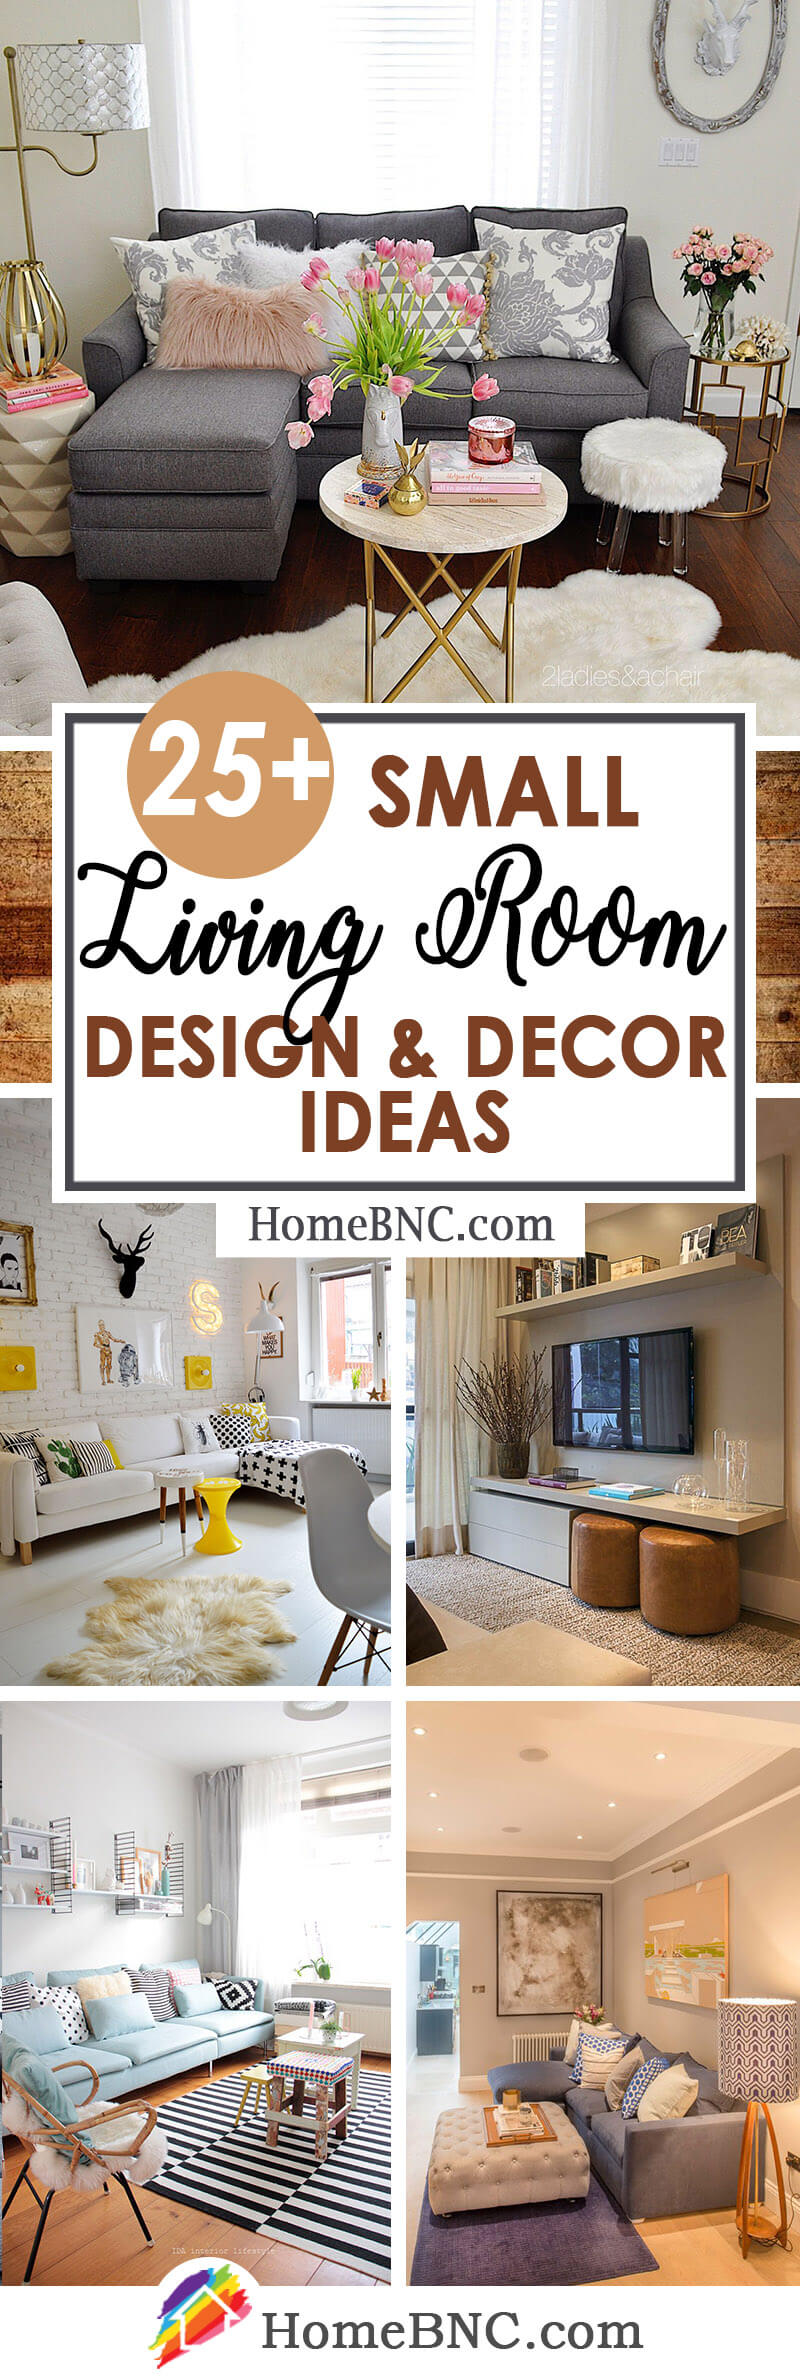 How To Decorate a House With Simple Things - Interiors Place